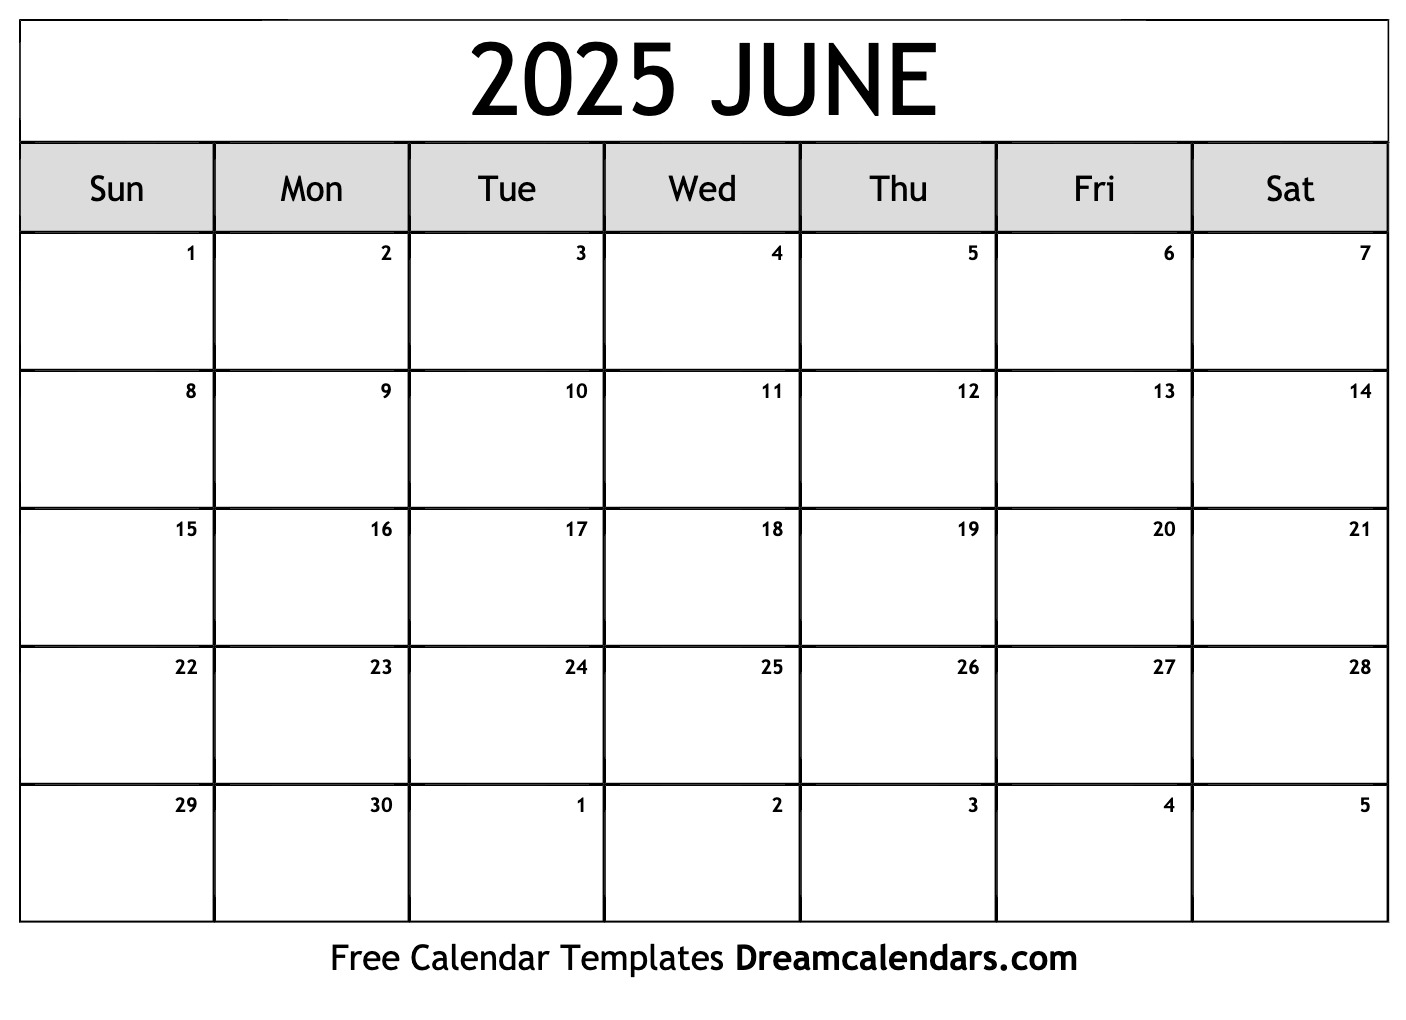 Calendar Of June 2025 With Holidays 